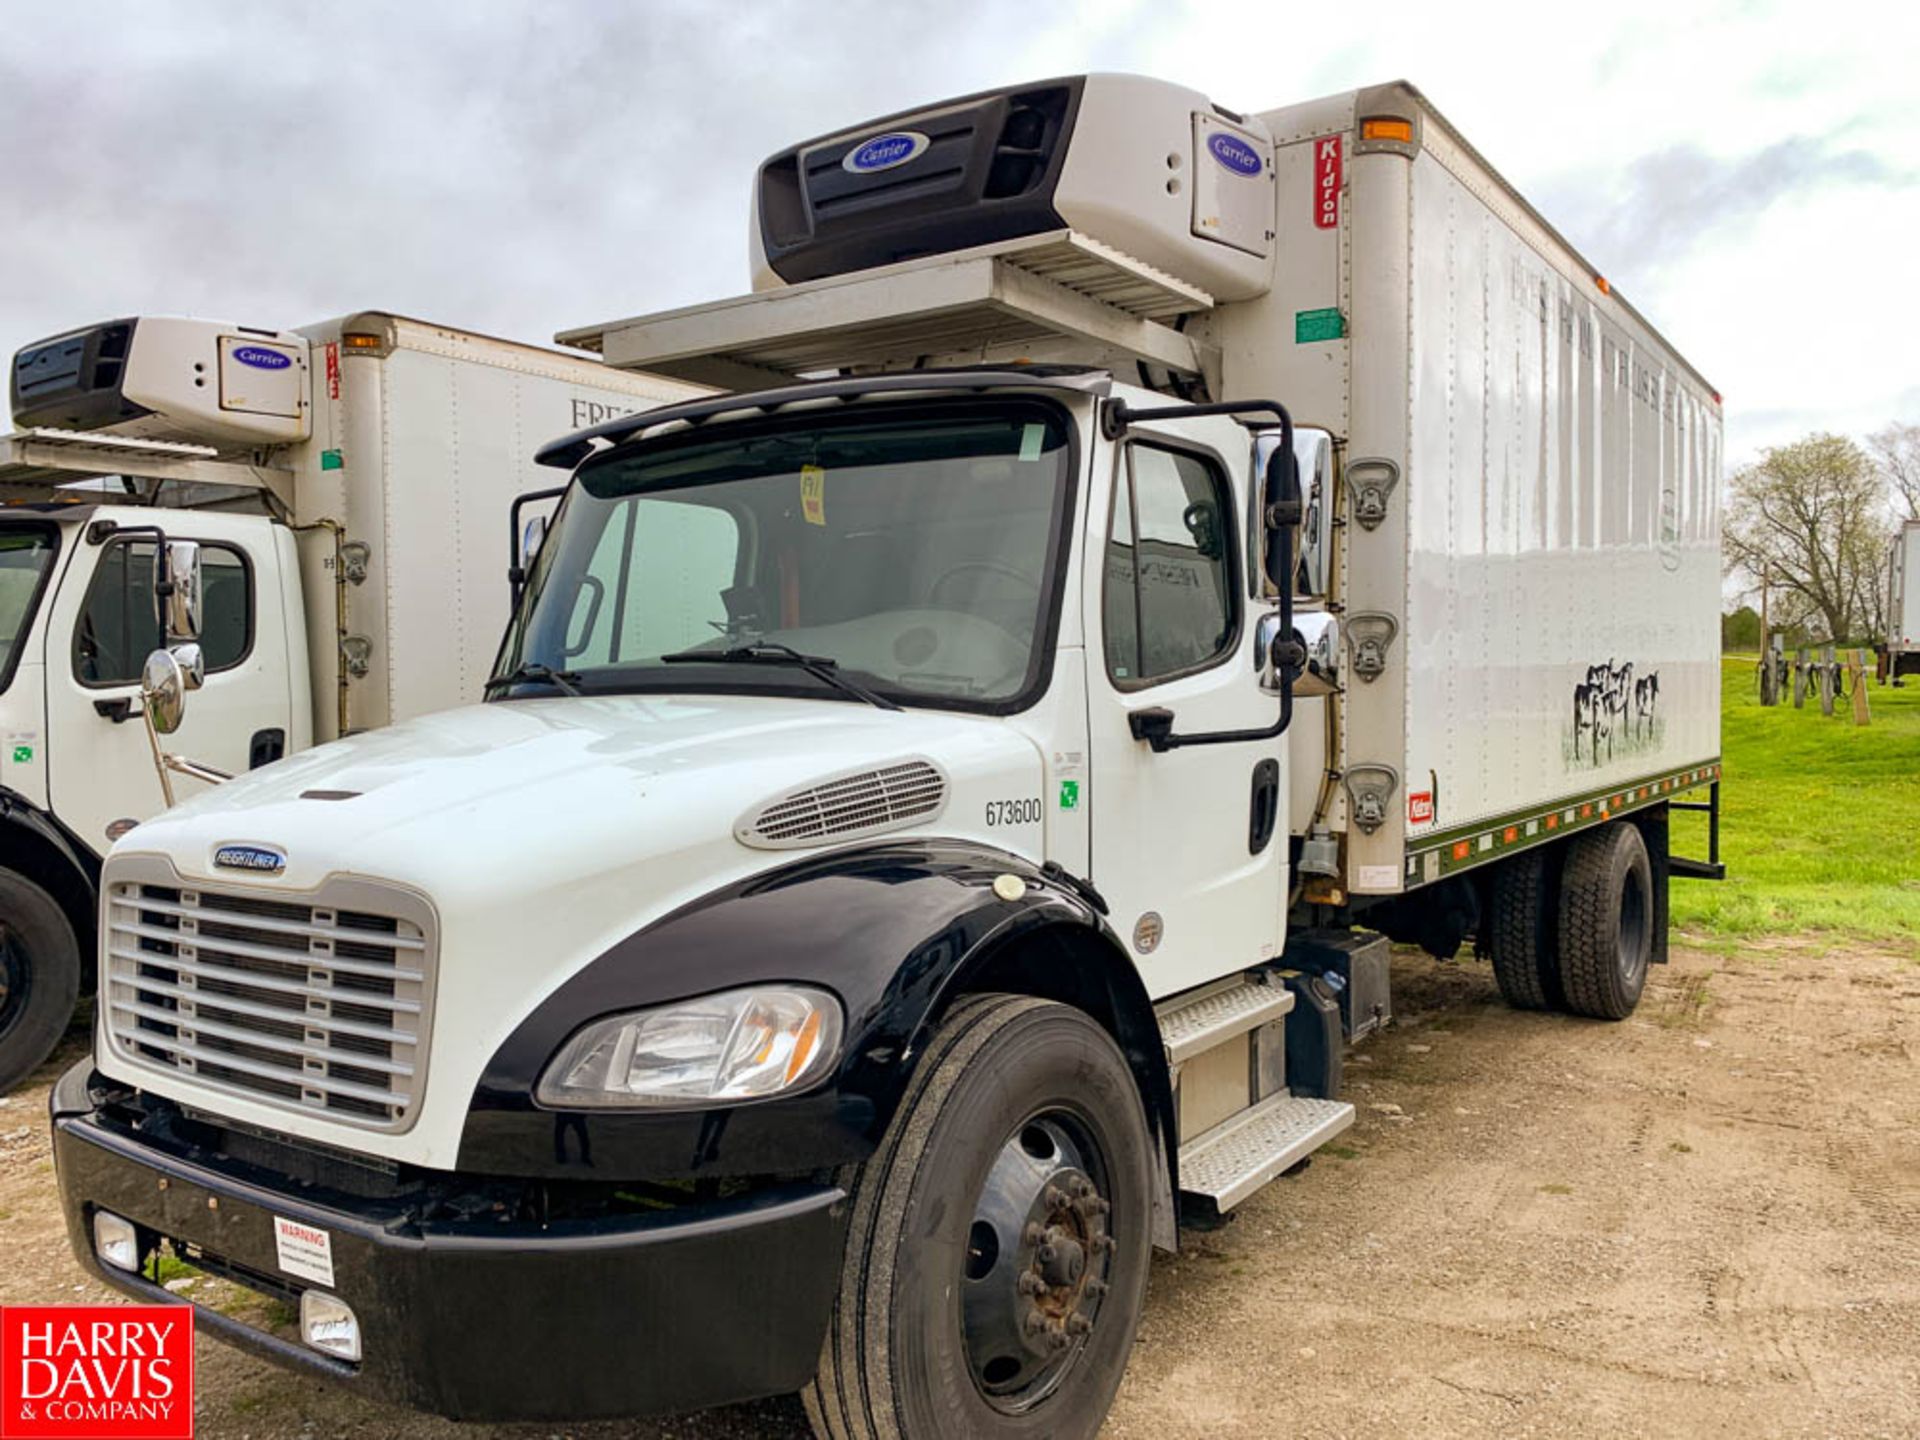 2017 Freightliner 20' Refrigerated Delivery Truck Model: M2106, 33,000 GVWR, Cummins IBS 6.7 280